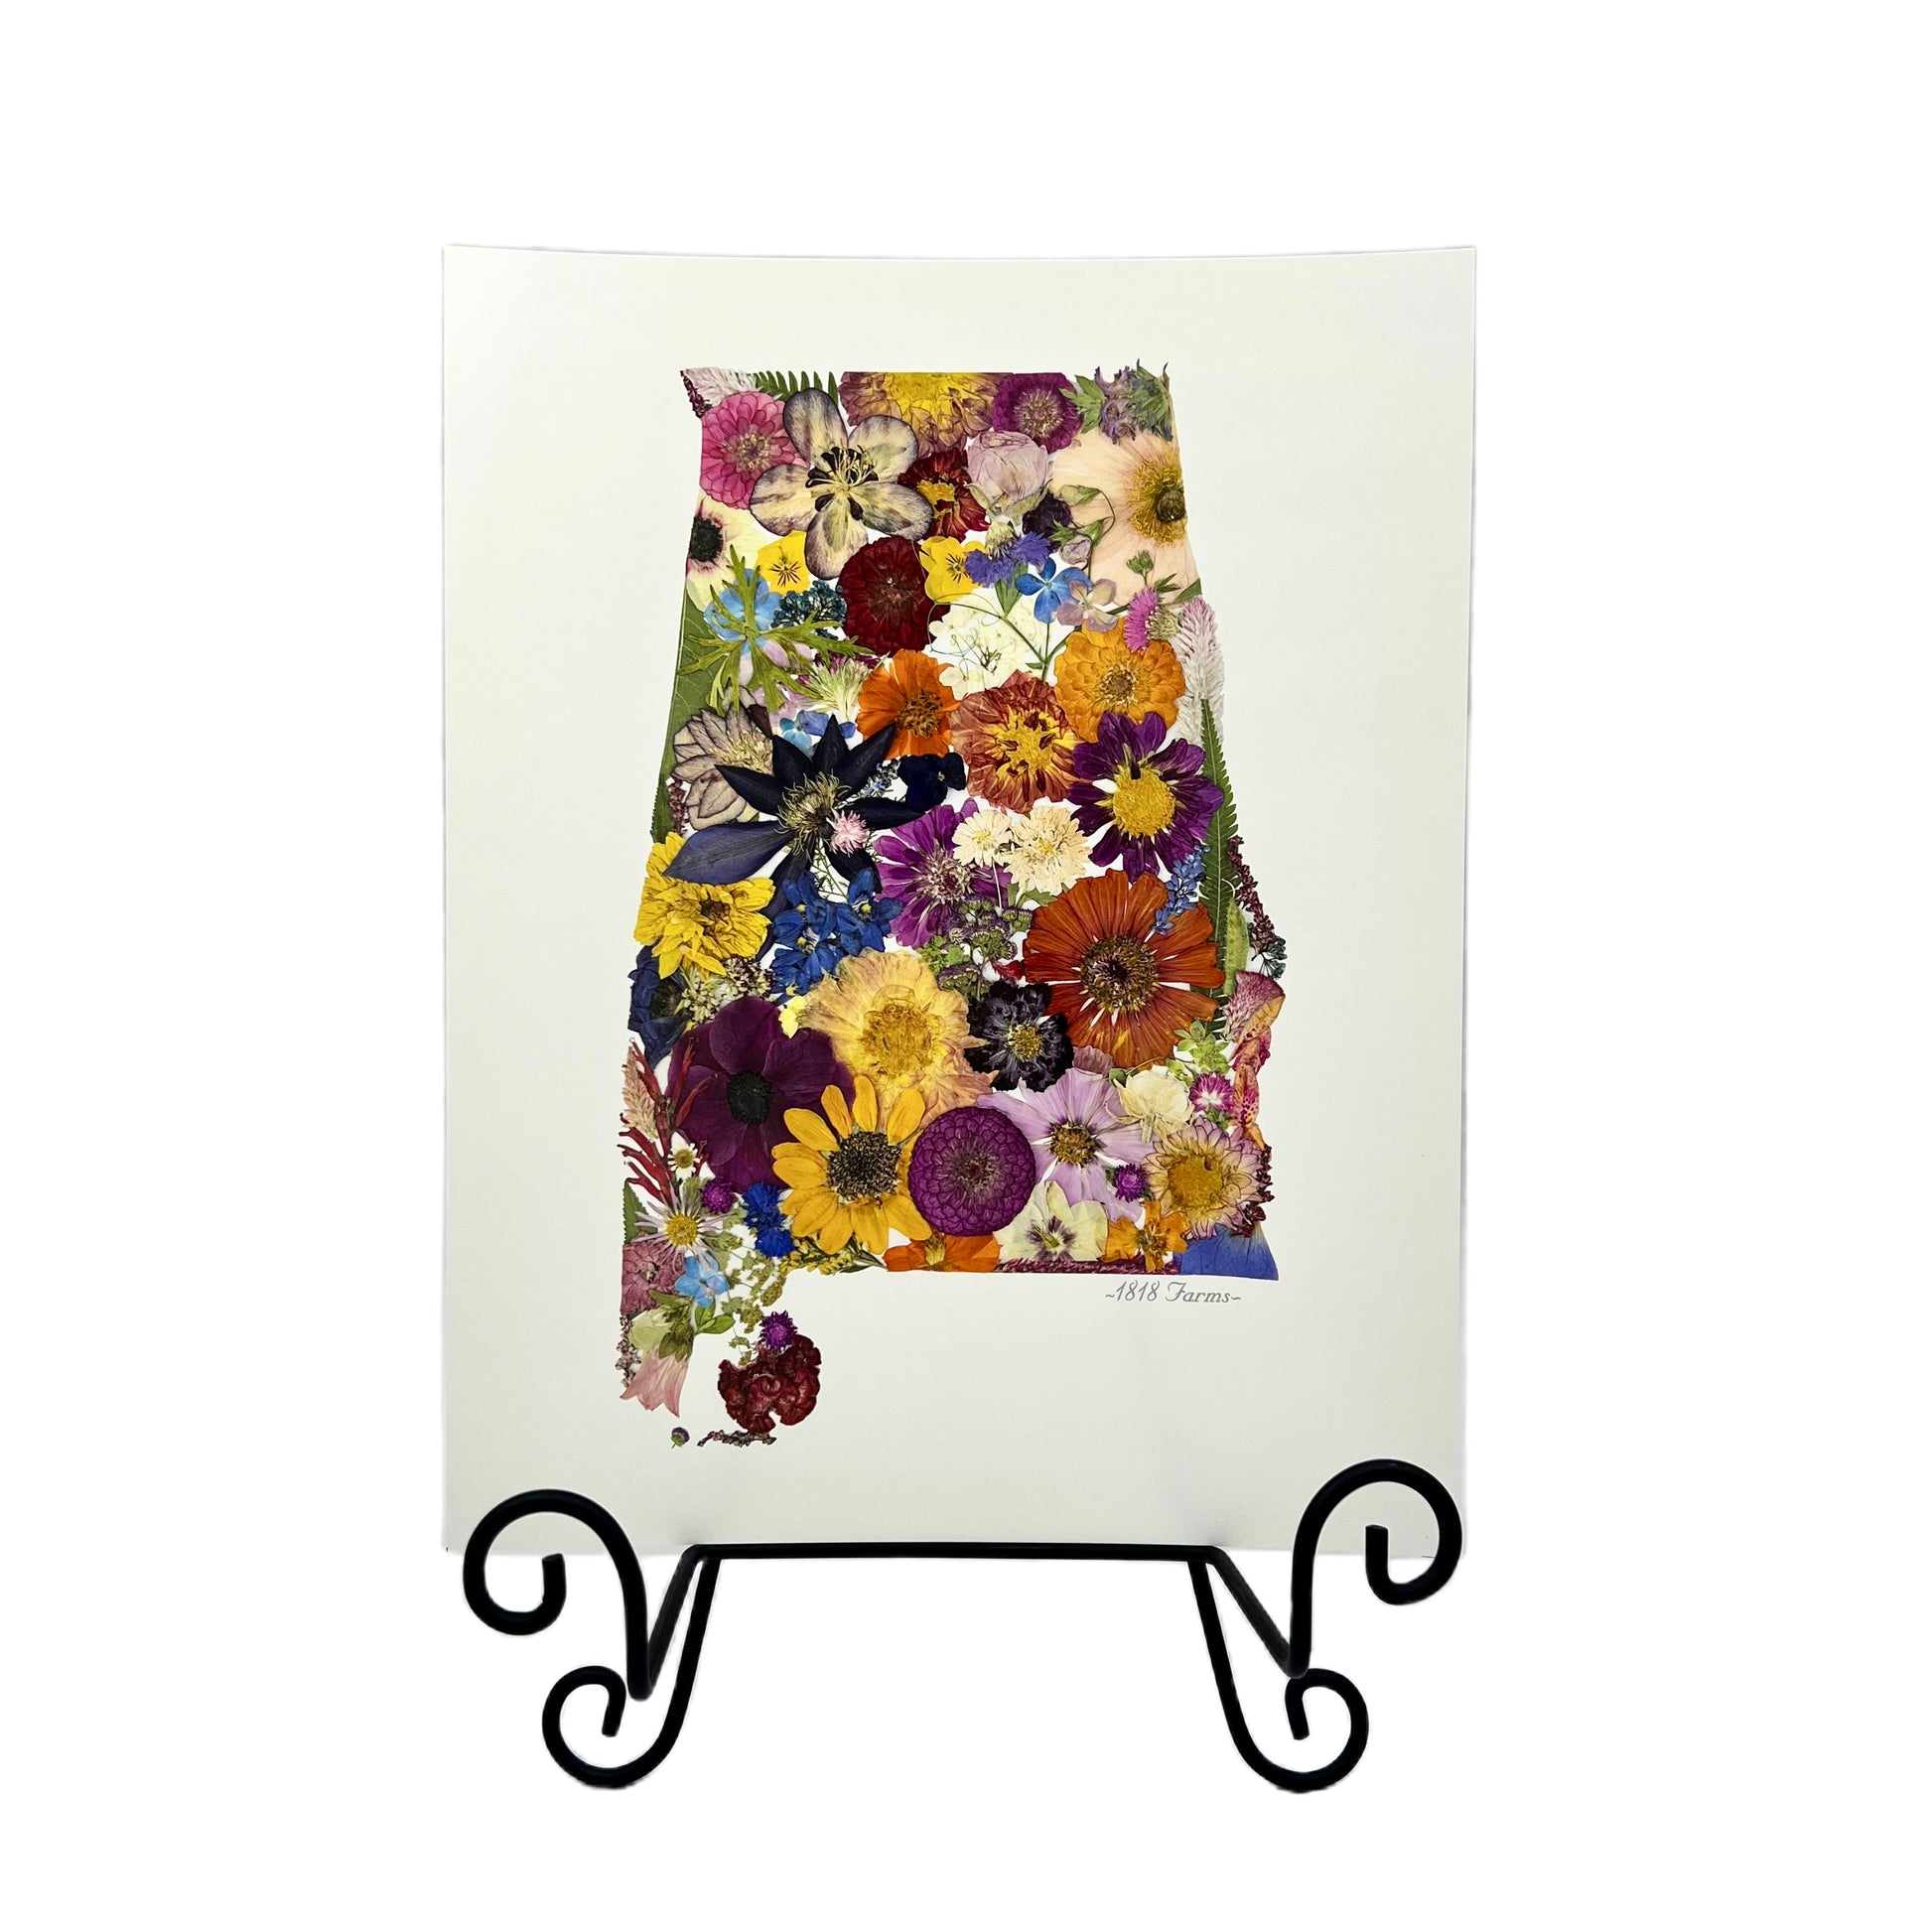 State Themed Giclée Print Featuring Dried, Pressed Flowers - "Where I Bloom" Collection Giclee Art Print 1818 Farms   